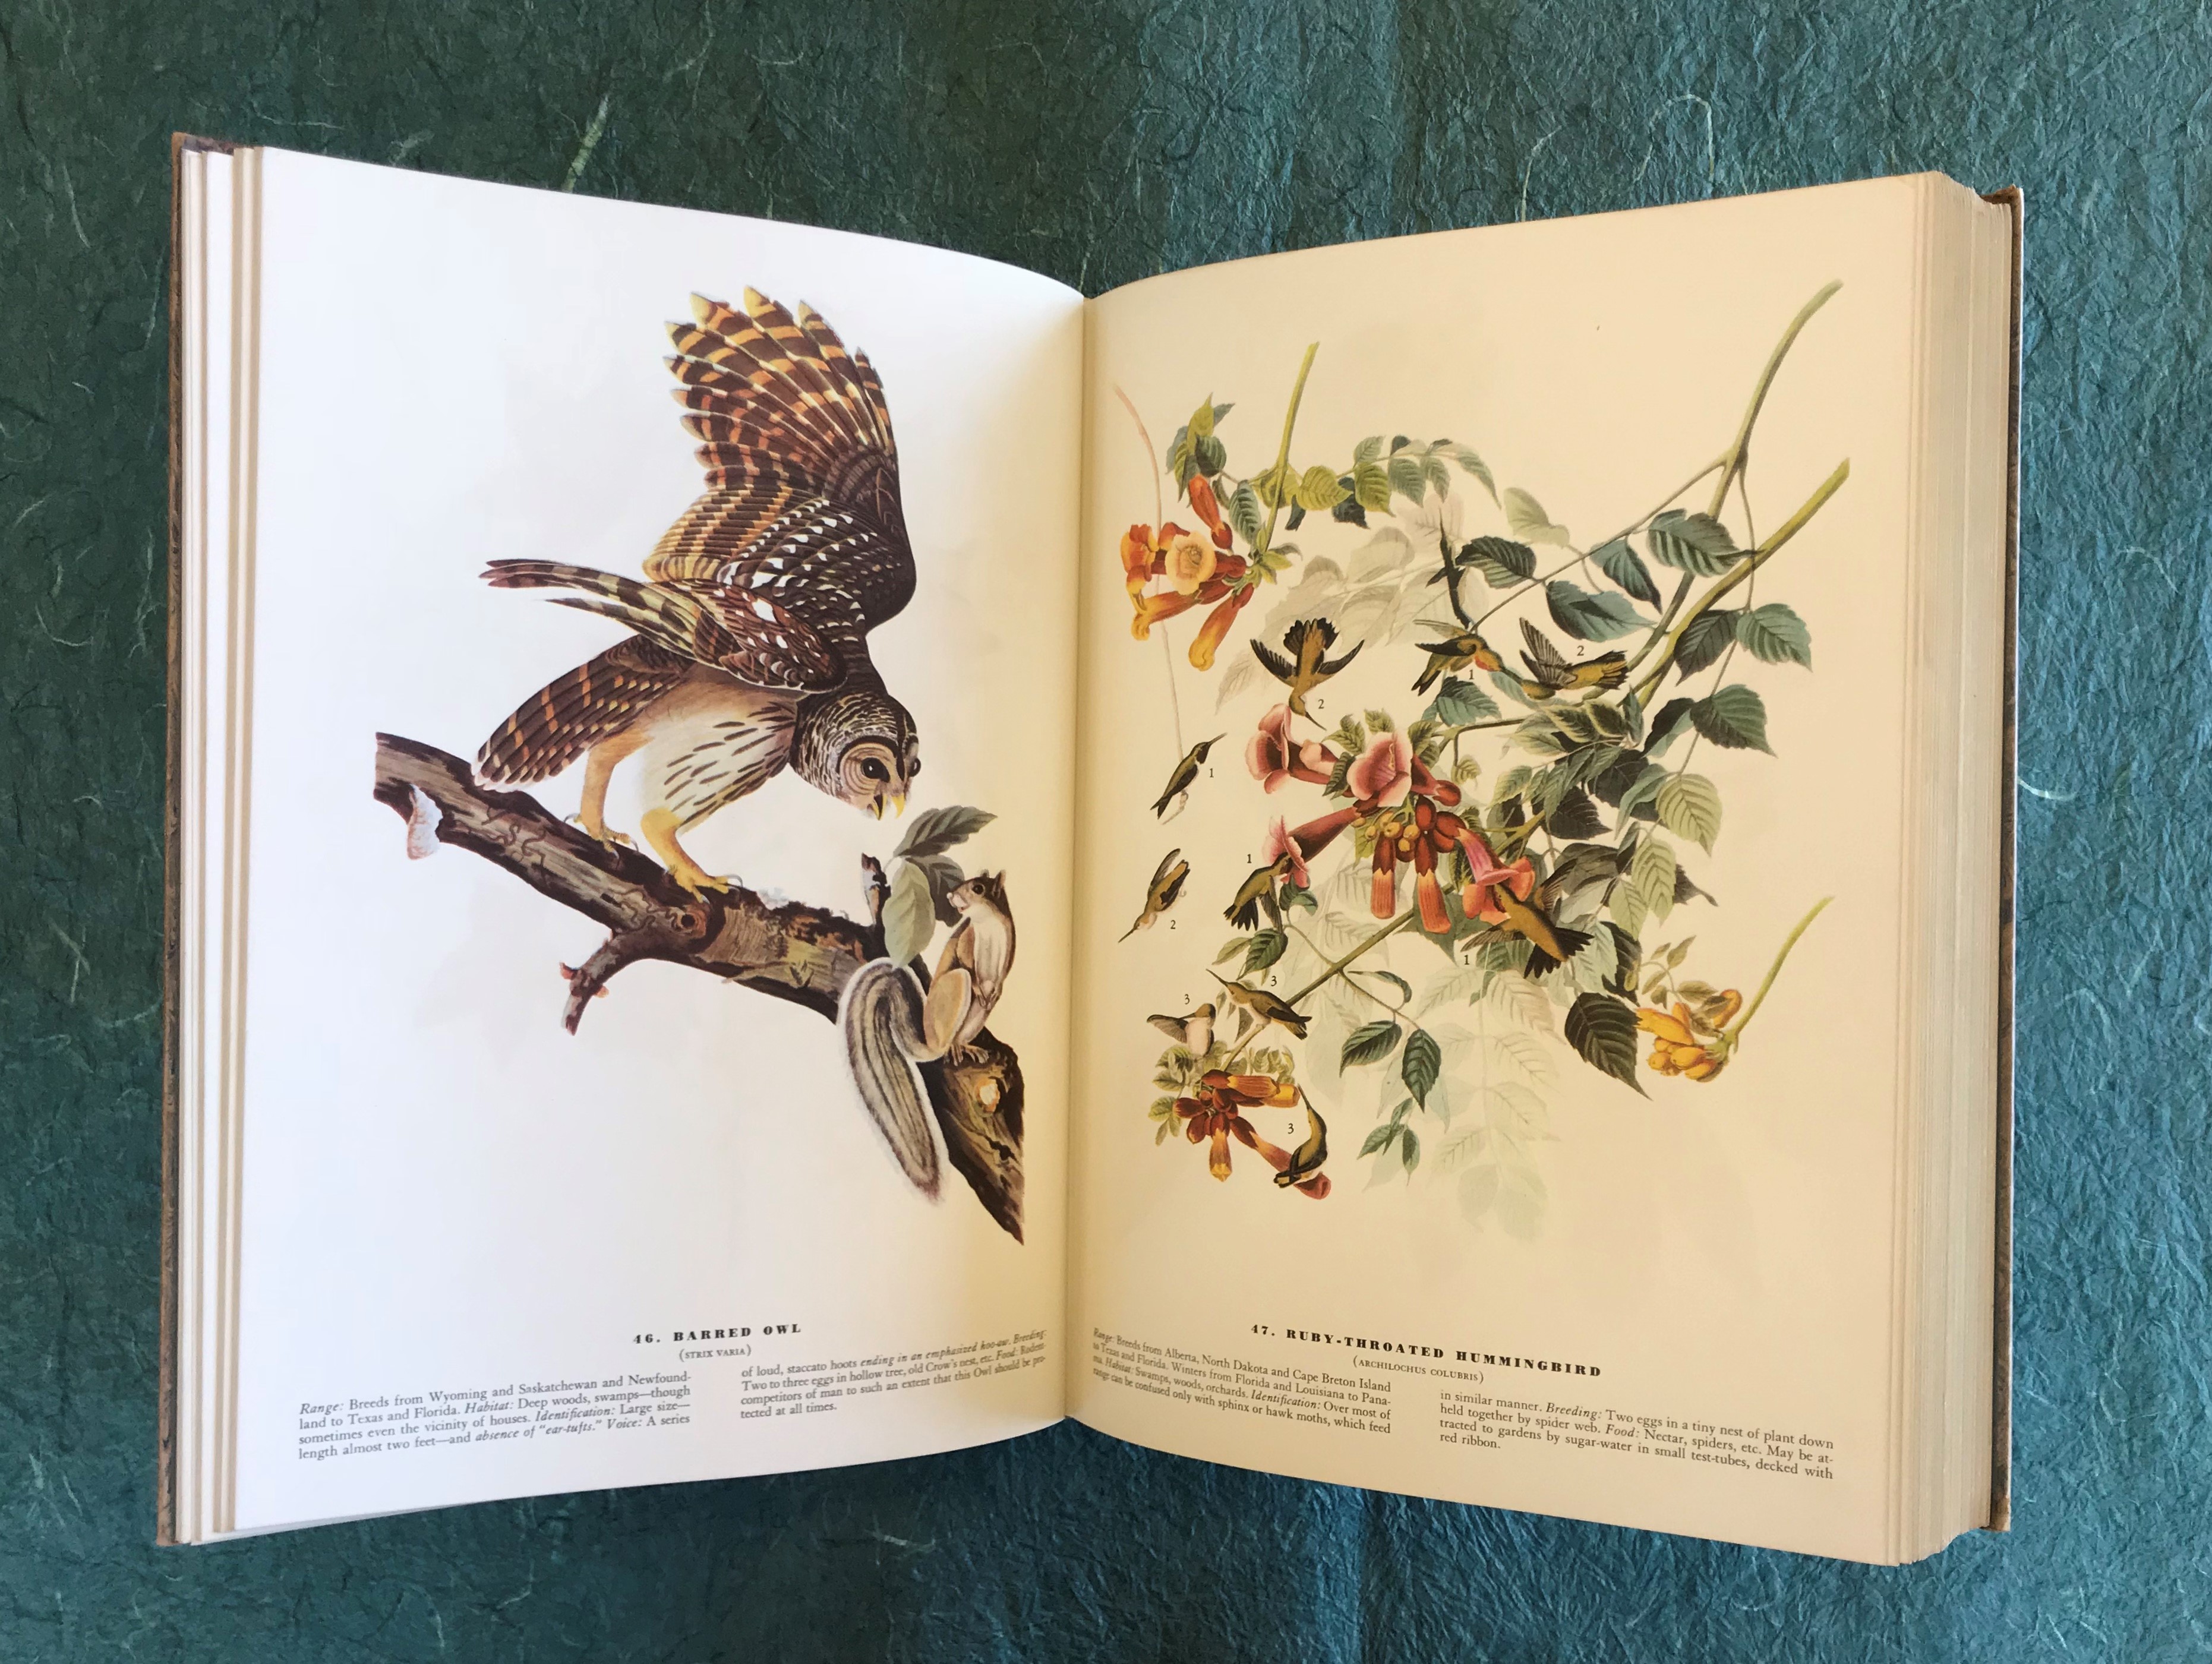 illustrations of an owl perched on a tree and humming birds drinking nectar from flowers